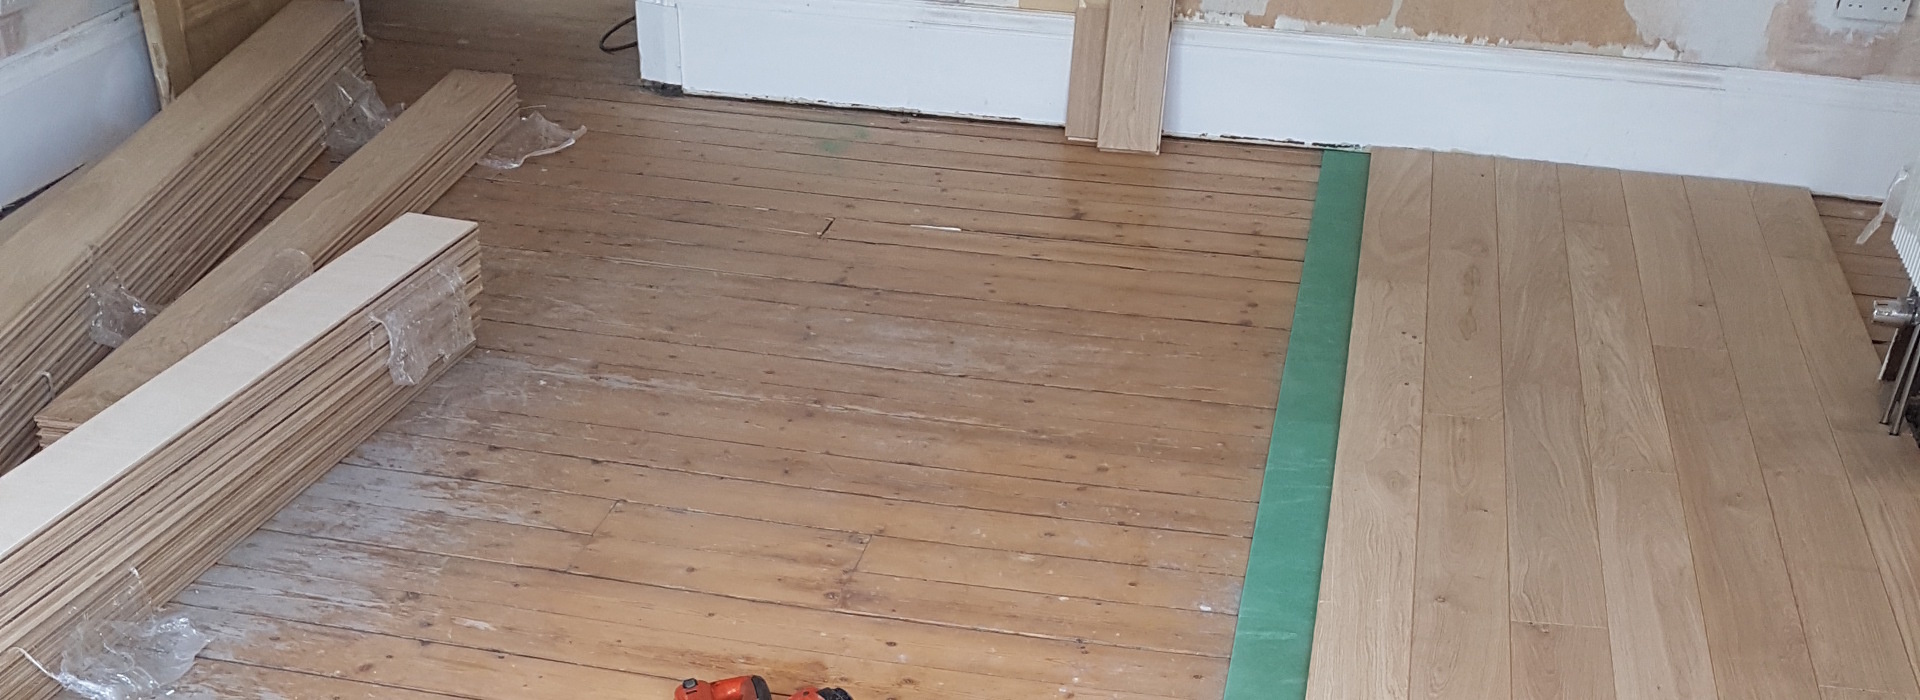 Use our quality Engineered wood flooring